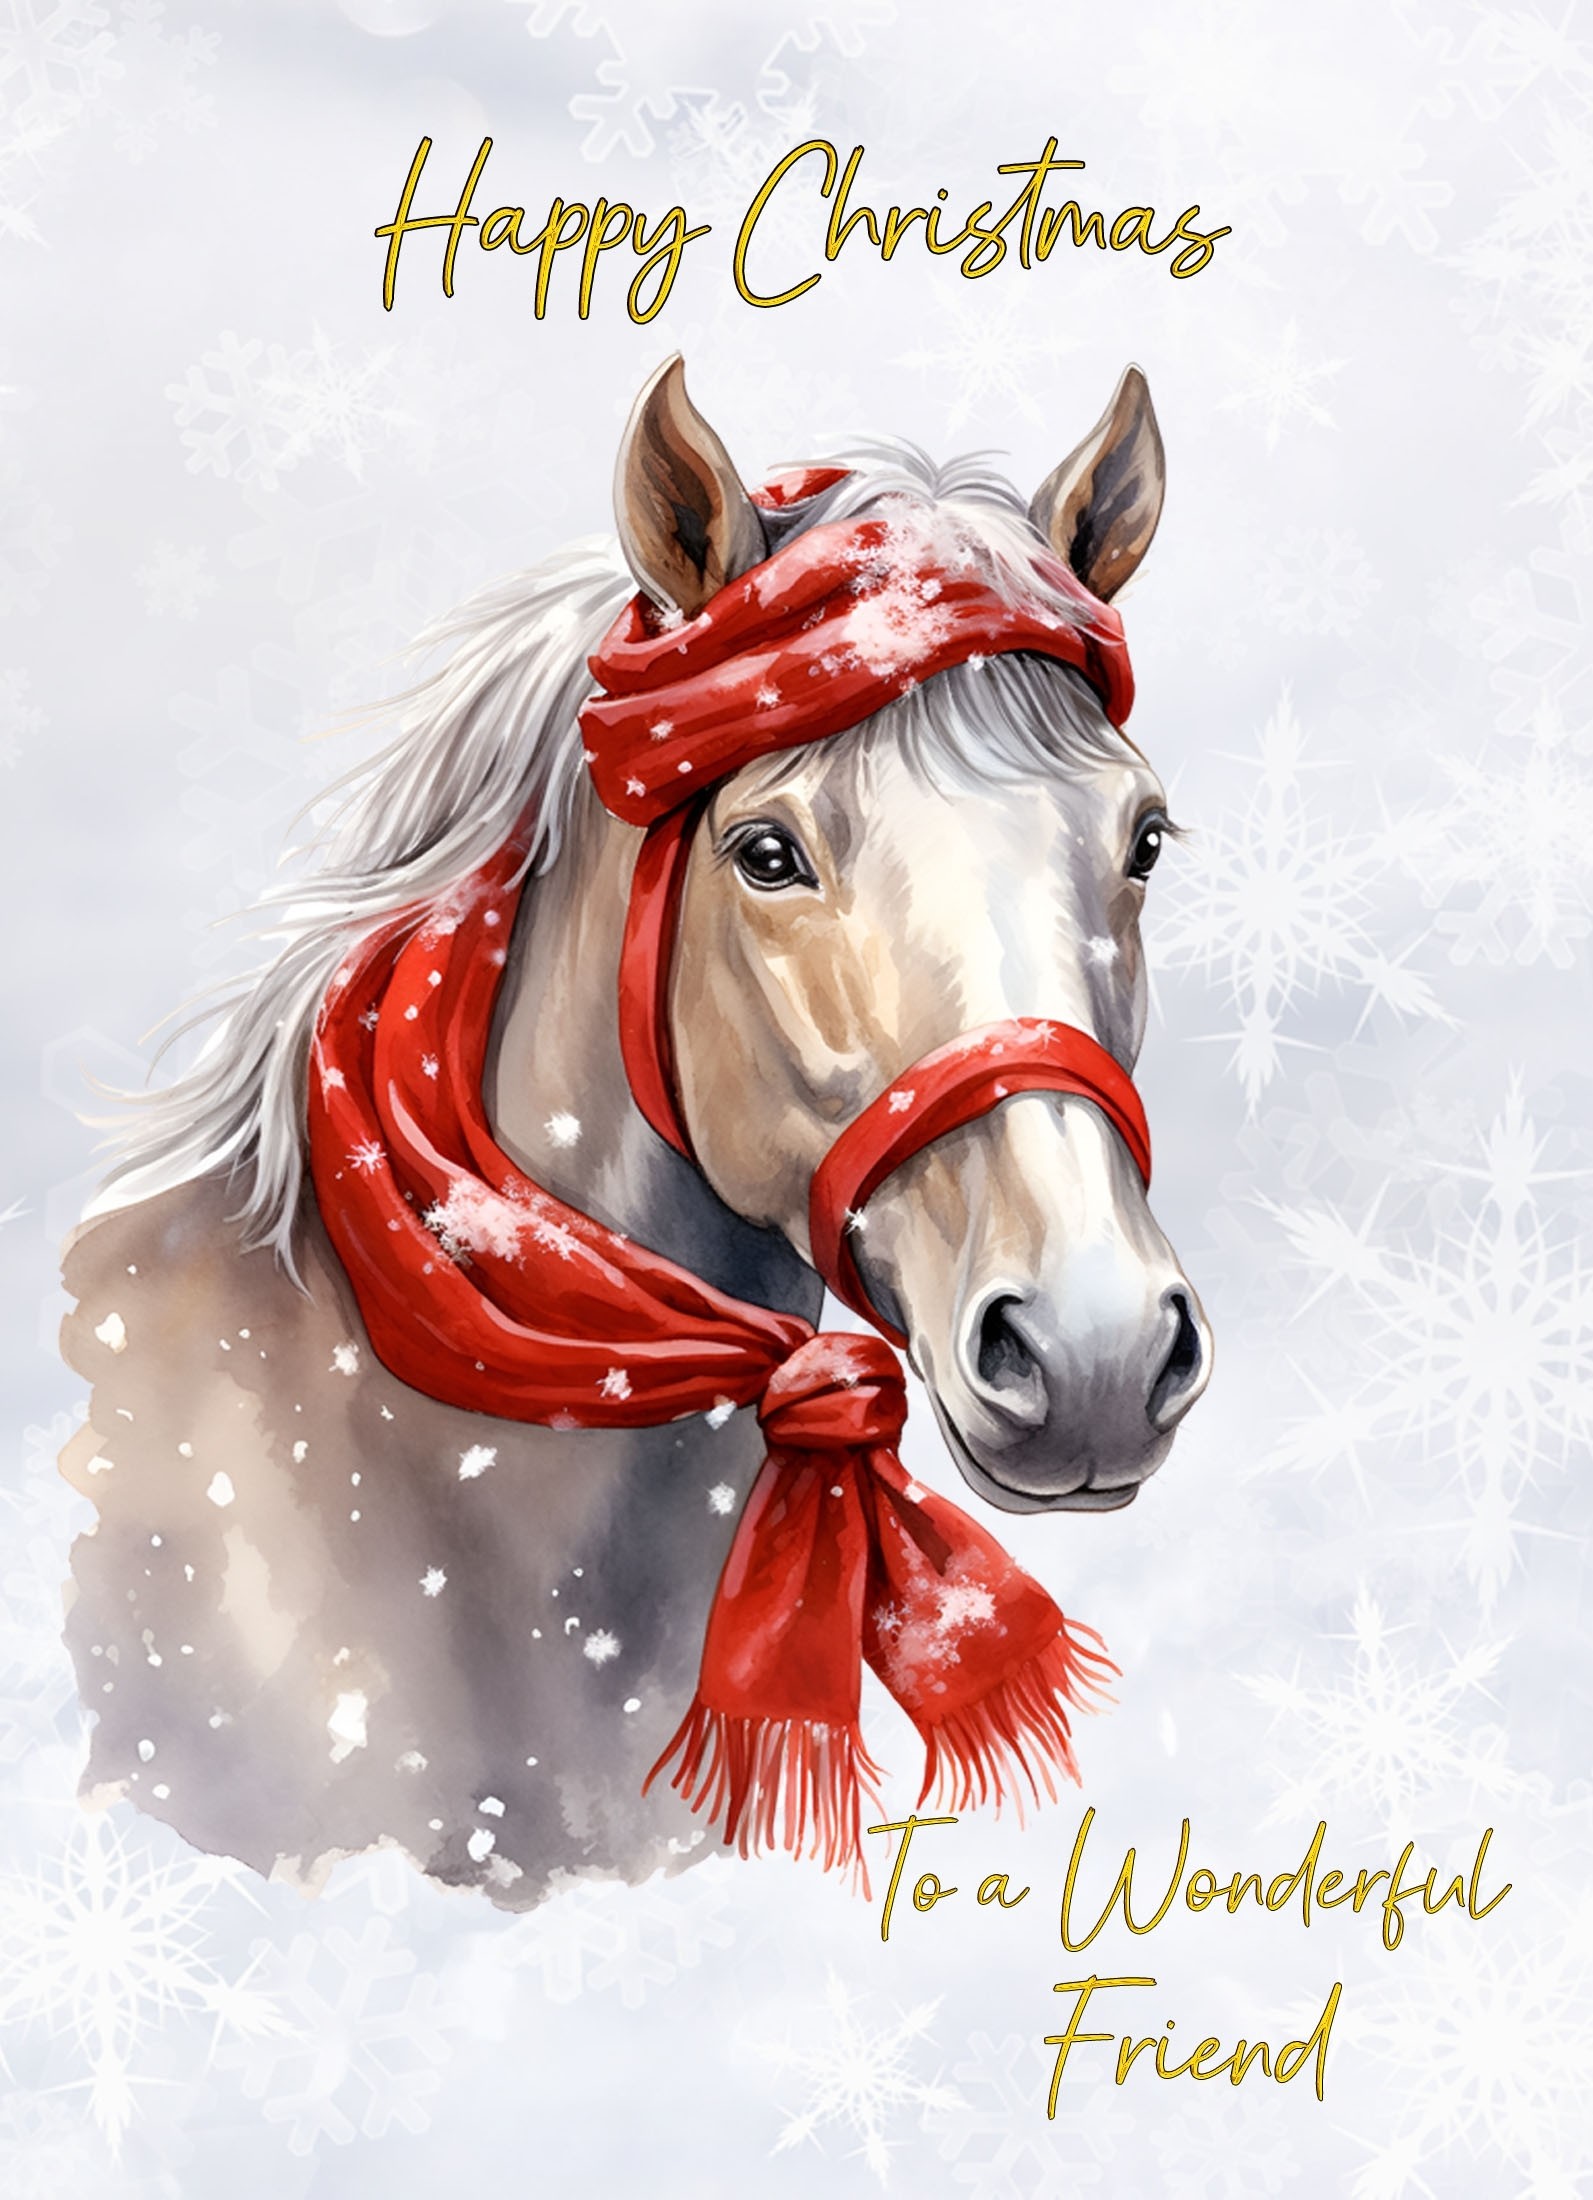 Christmas Card For Friend (Horse Art Red)